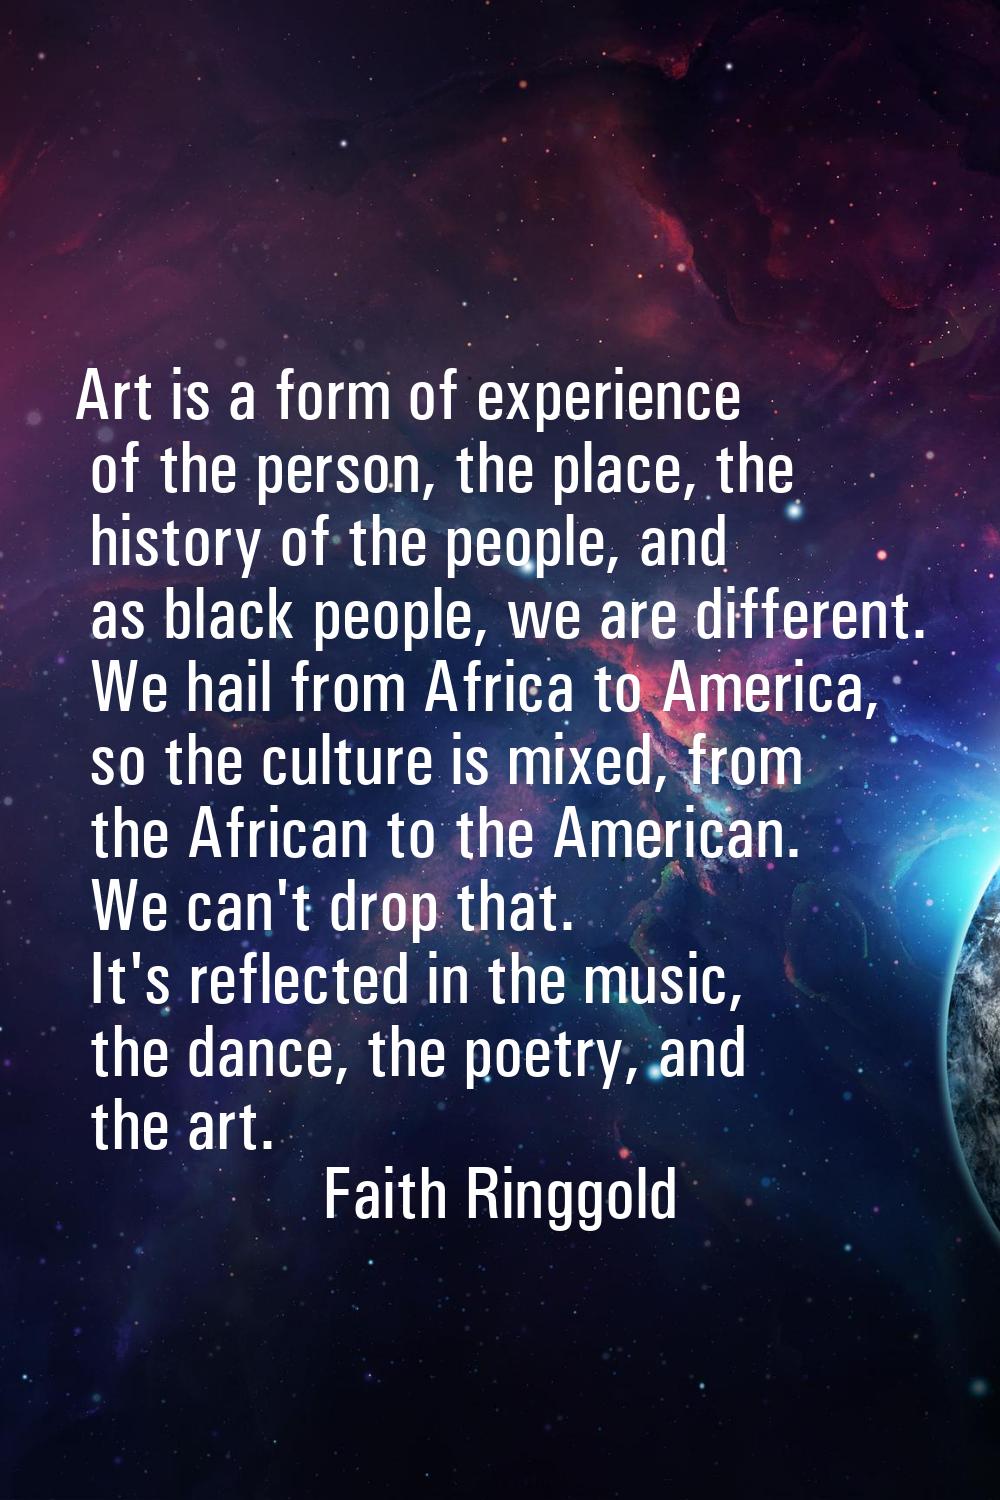 Art is a form of experience of the person, the place, the history of the people, and as black peopl